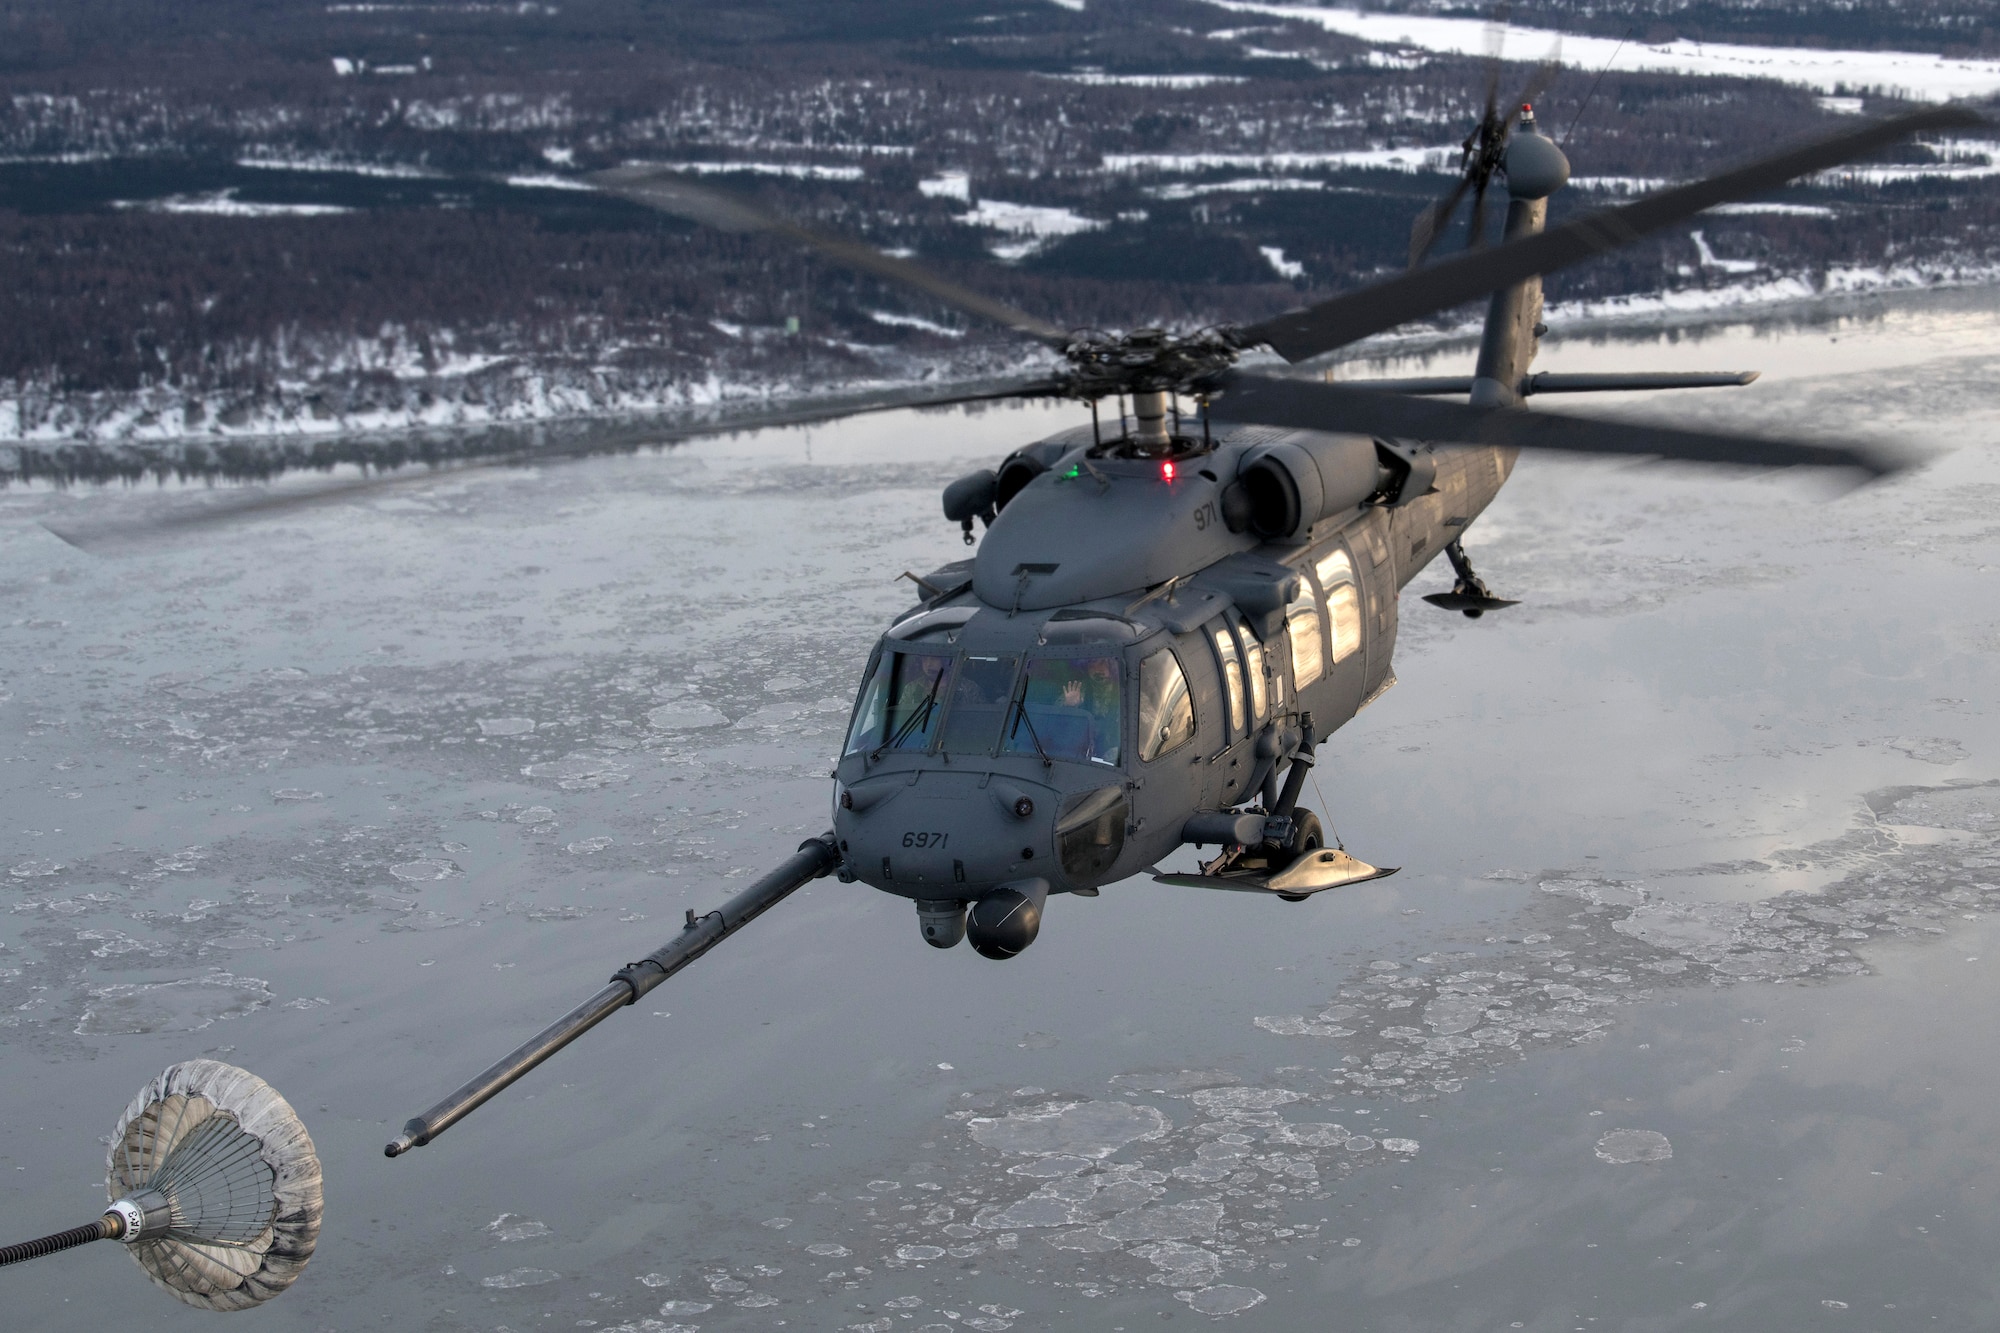 A U.S. Air Force HH-60G Pave Hawk helicopter assigned to the 210th Rescue Squadron, Alaska Air National Guard, conducts aerial refueling from a U.S. Air Force HC-130J Combat King II assigned to the 211th Rescue Squadron, Alaska Air National Guard, over Alaska, Jan. 21, 2021, during Operation Noble Defender.